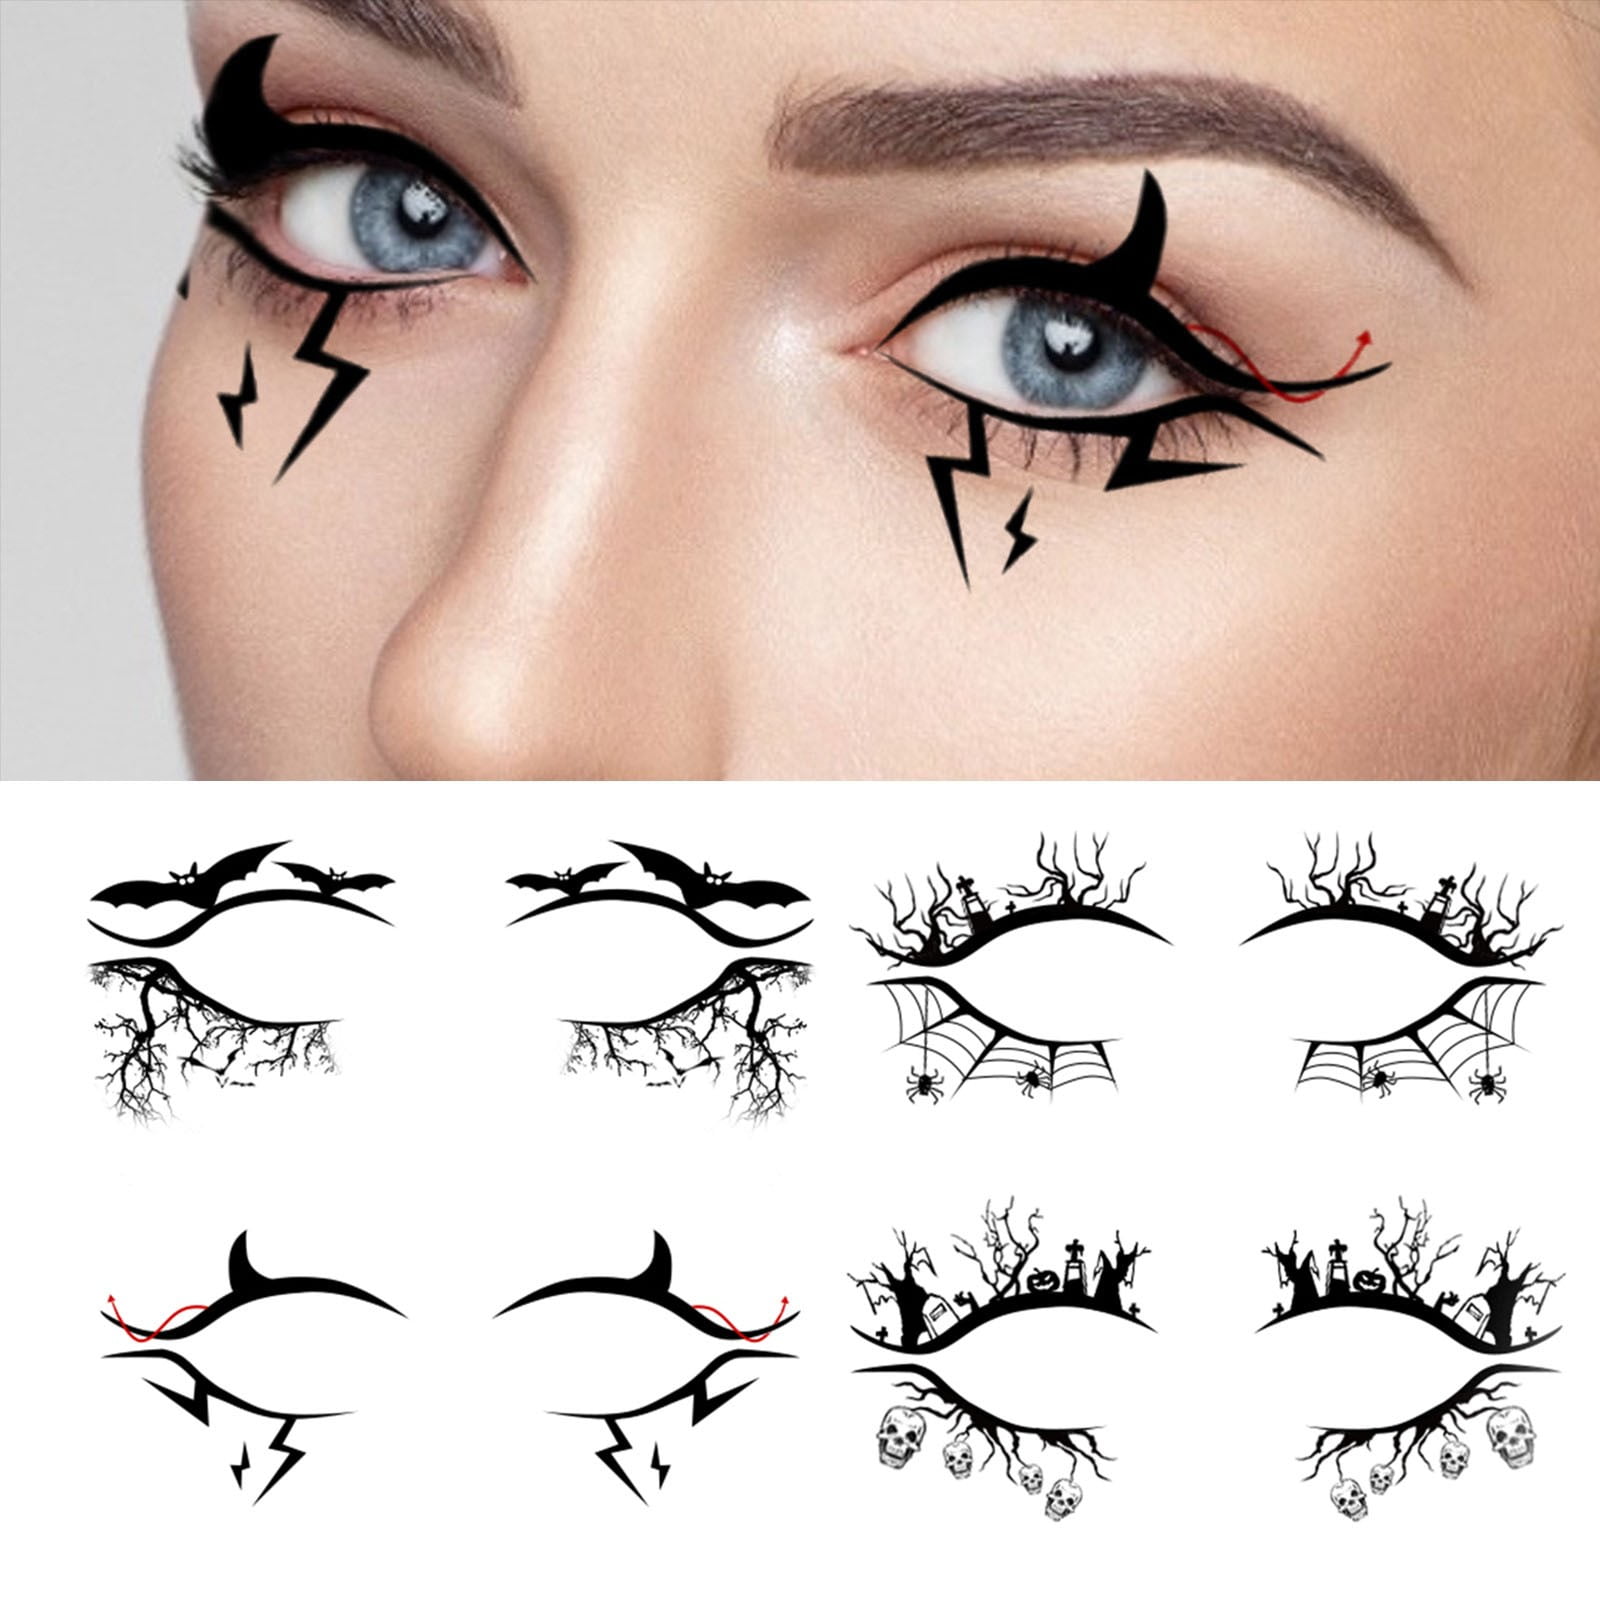 Artistic Eye Stickers For Fashionable Eyeliner Decoration And